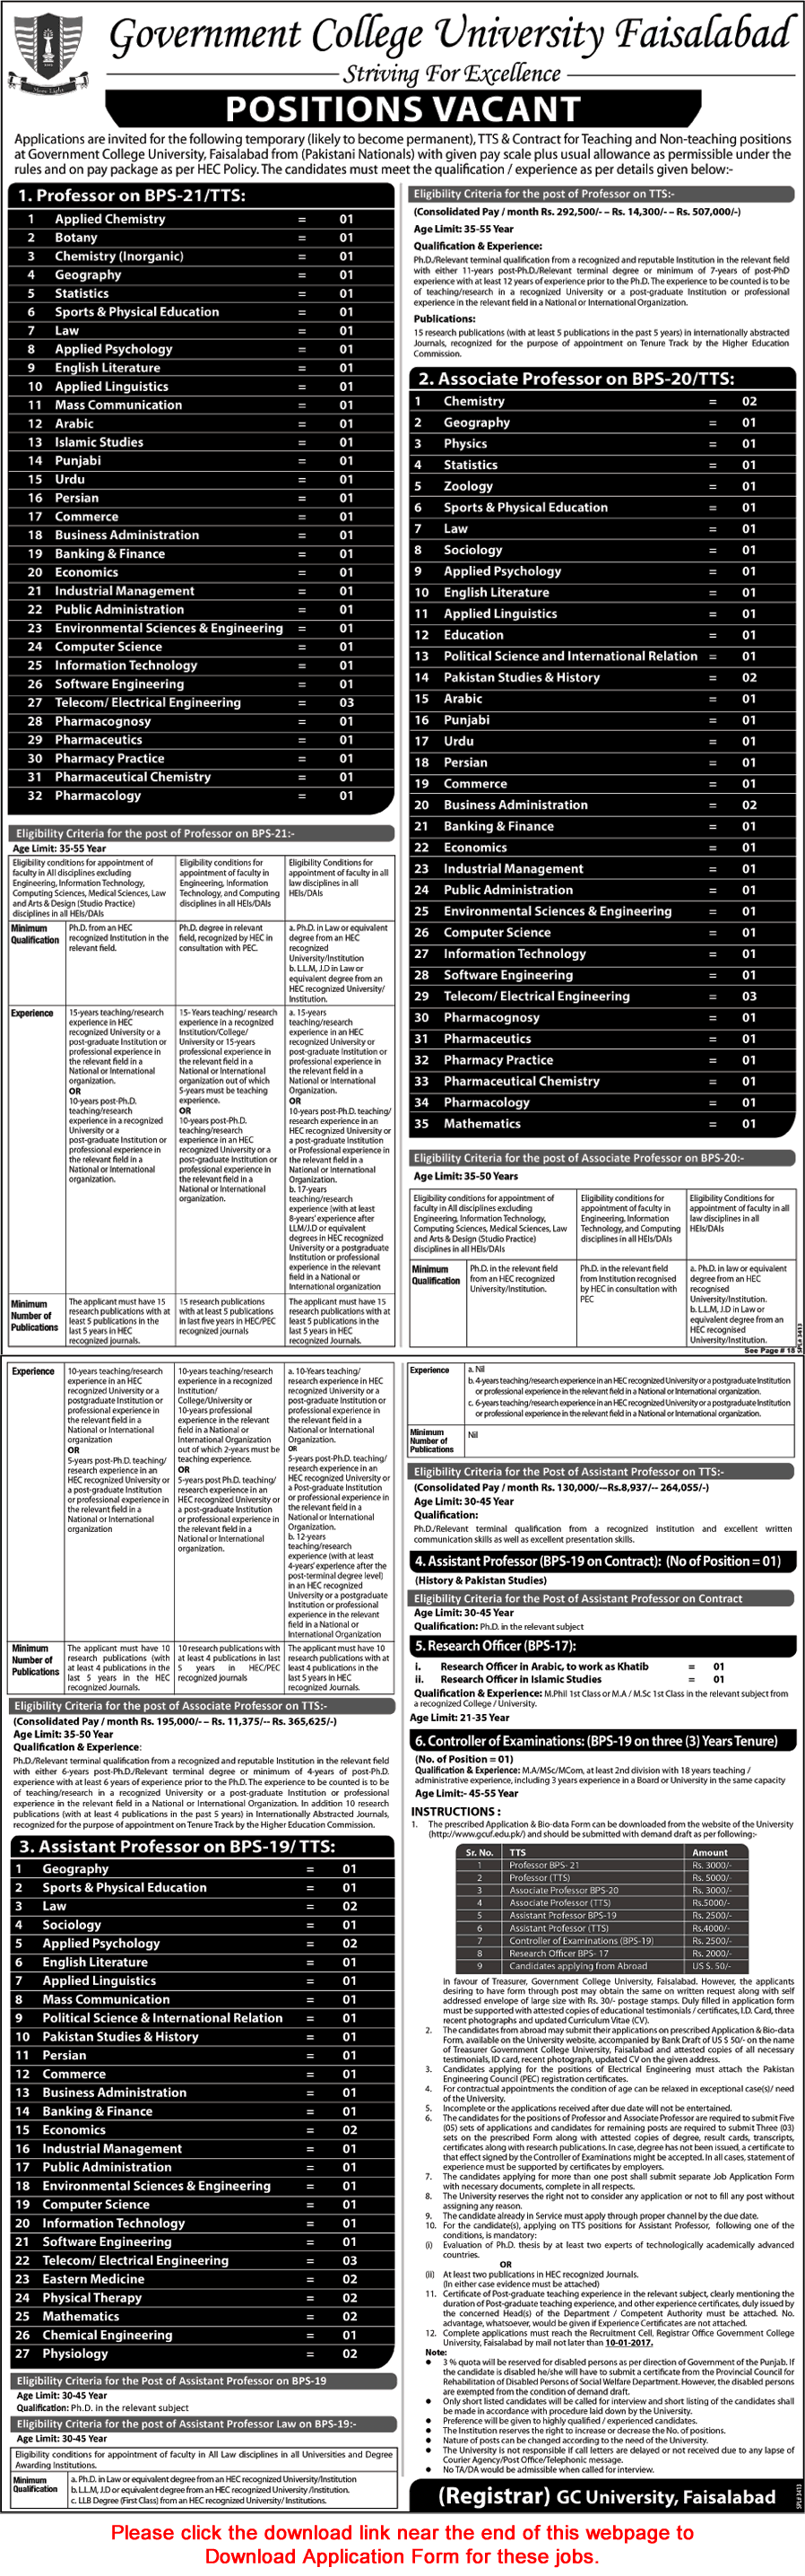 GC University Faisalabad Jobs December 2016 Application Form Teaching Faculty & Others Latest